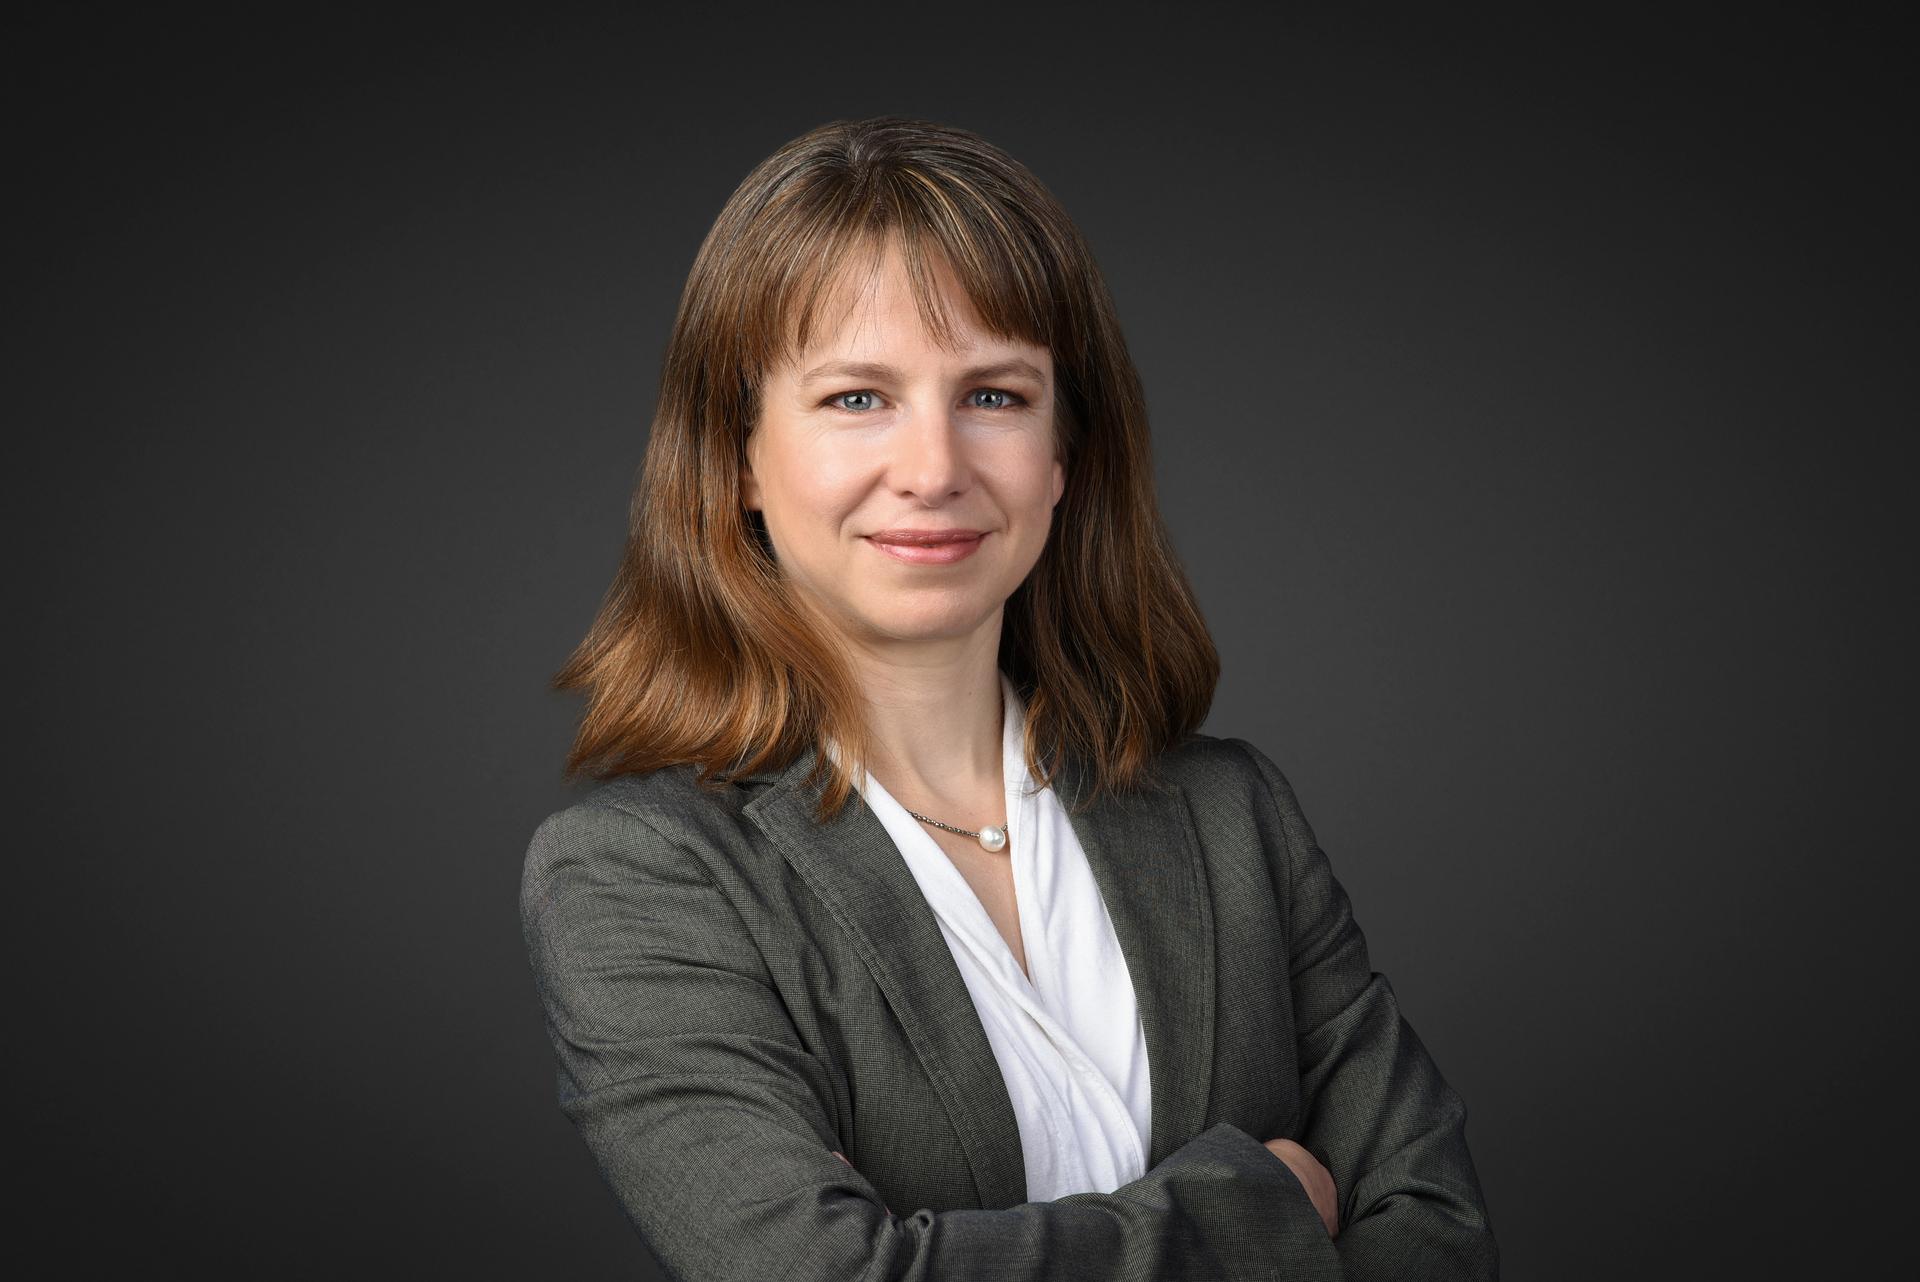 Portrait of Simone Schärer, Corporate Sustainability Manager